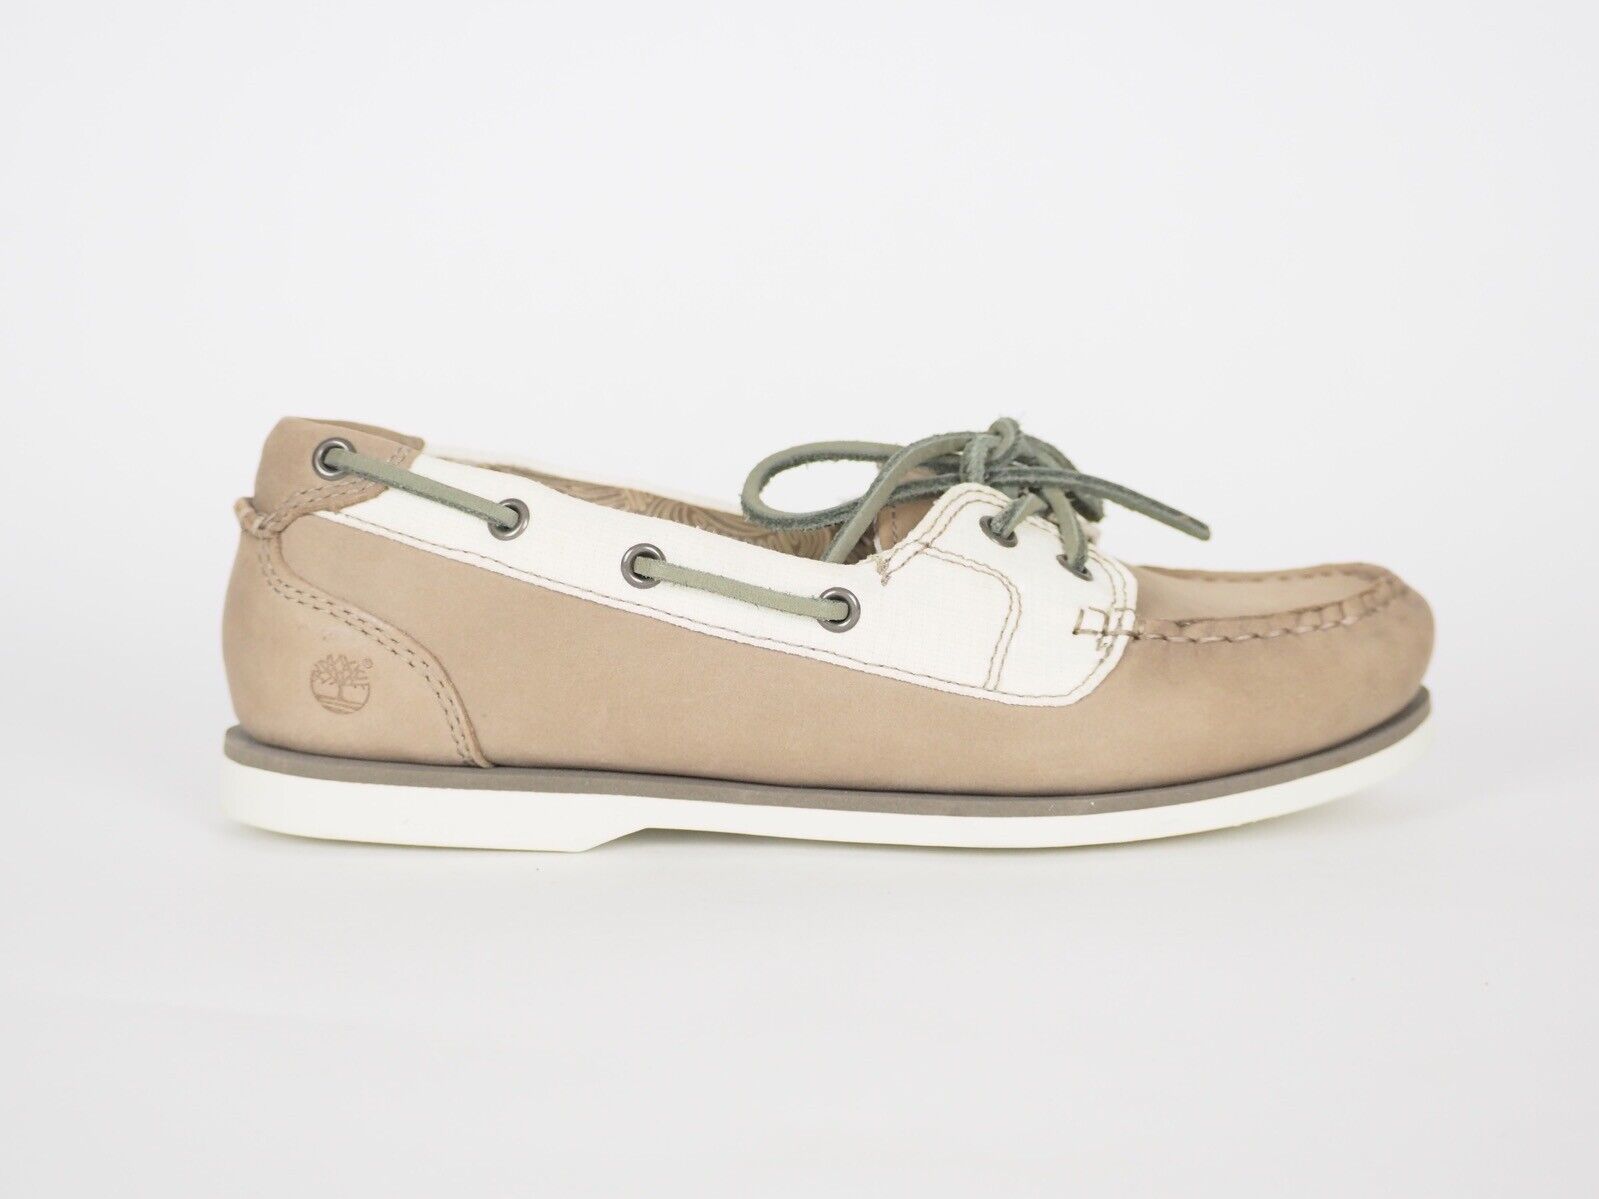 Womens Timberland 2 Eye 27616 Taupe Leather Fabric Boat Deck Shoes - London Top Style